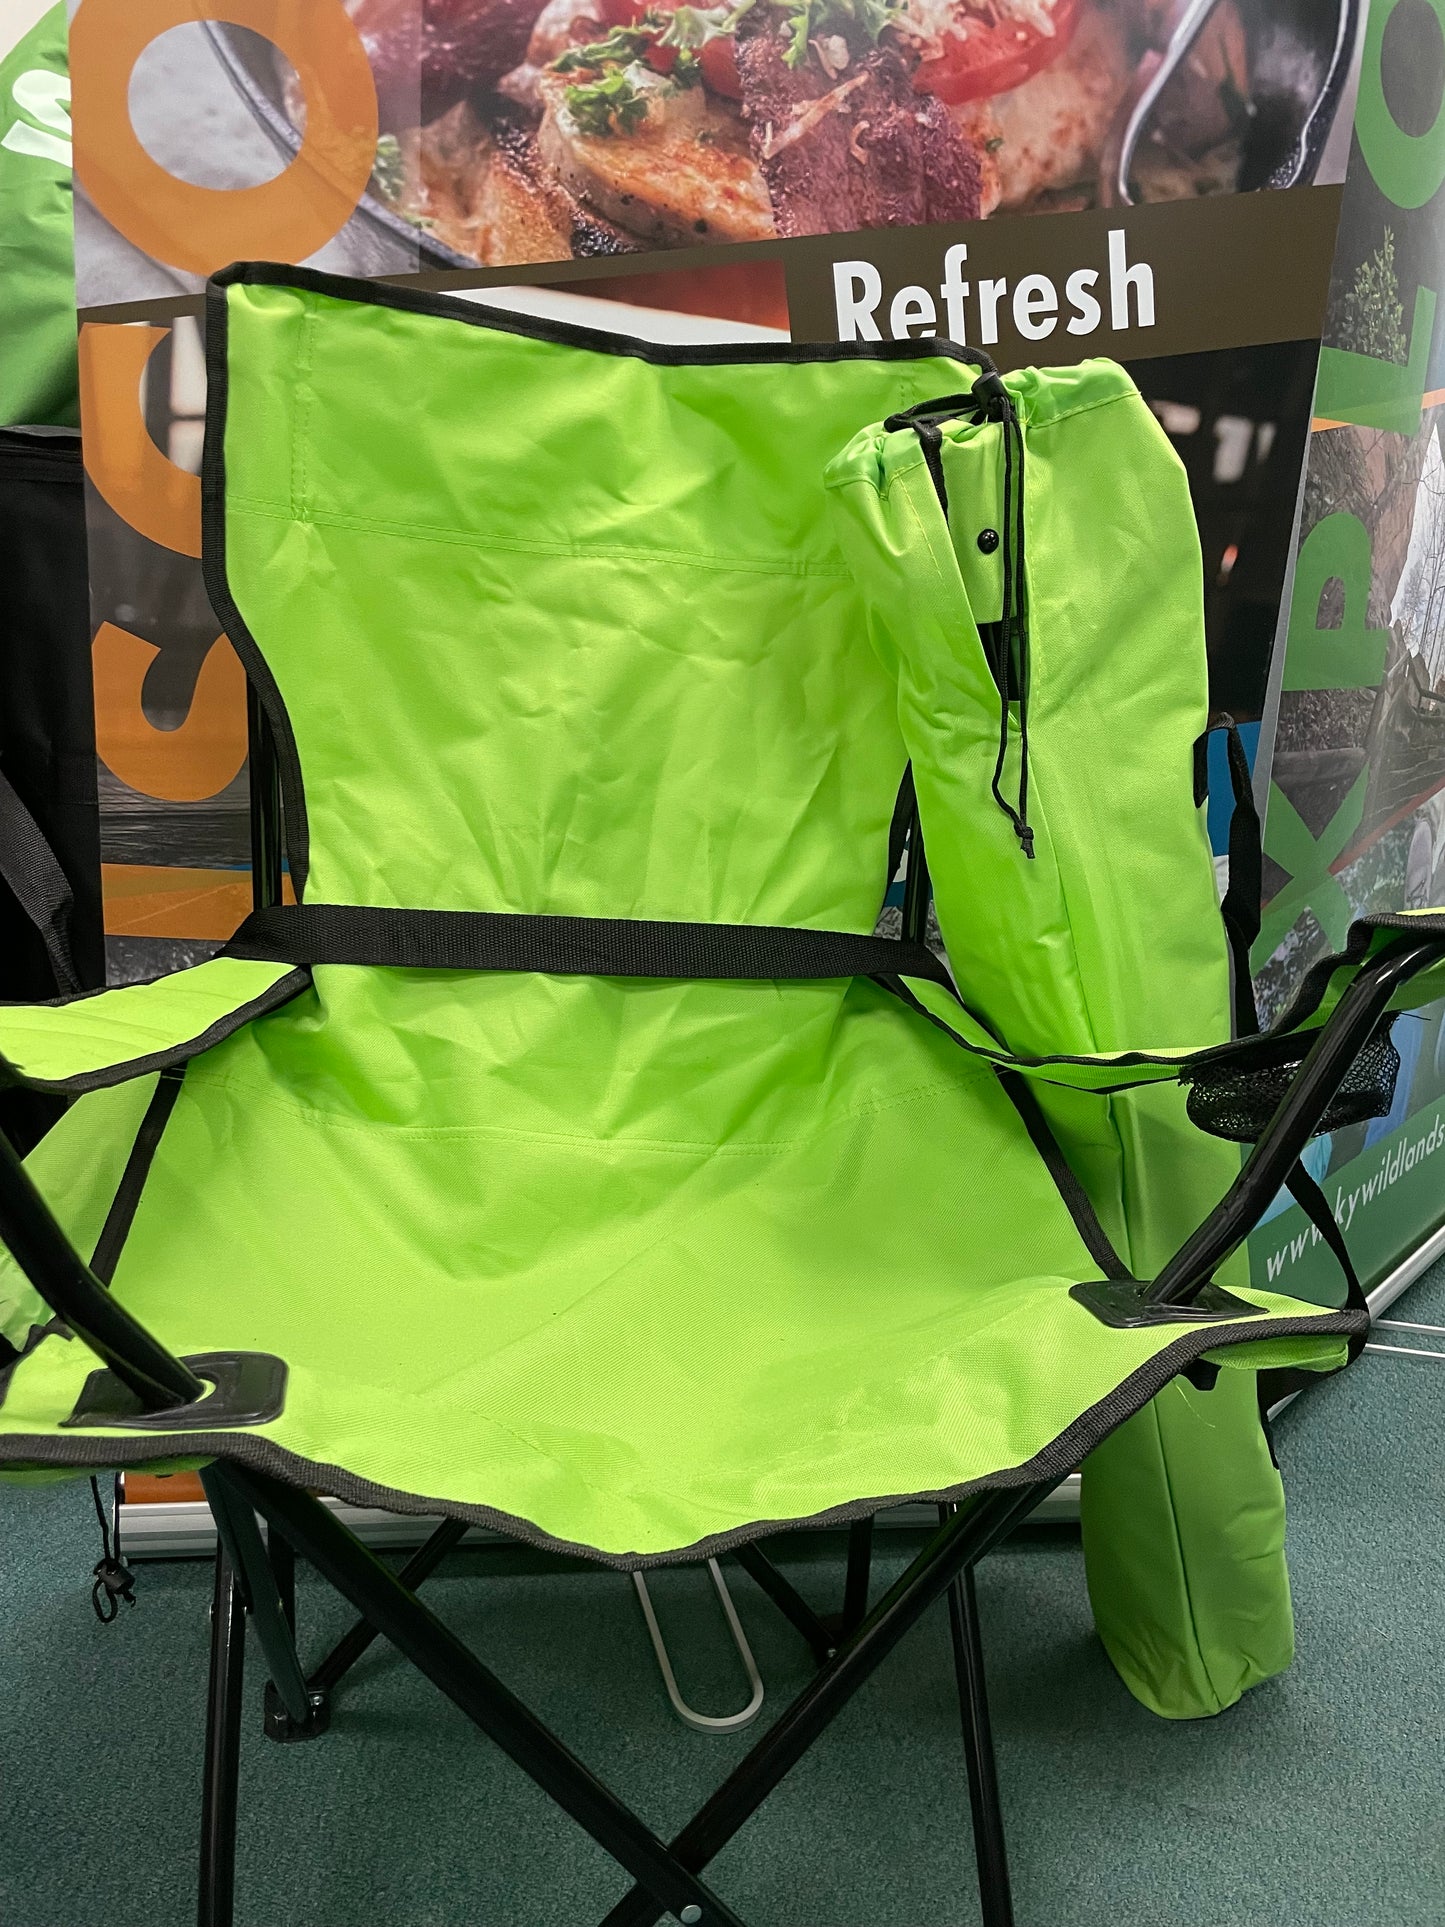 The Kentucky Wildlands Camp Chairs